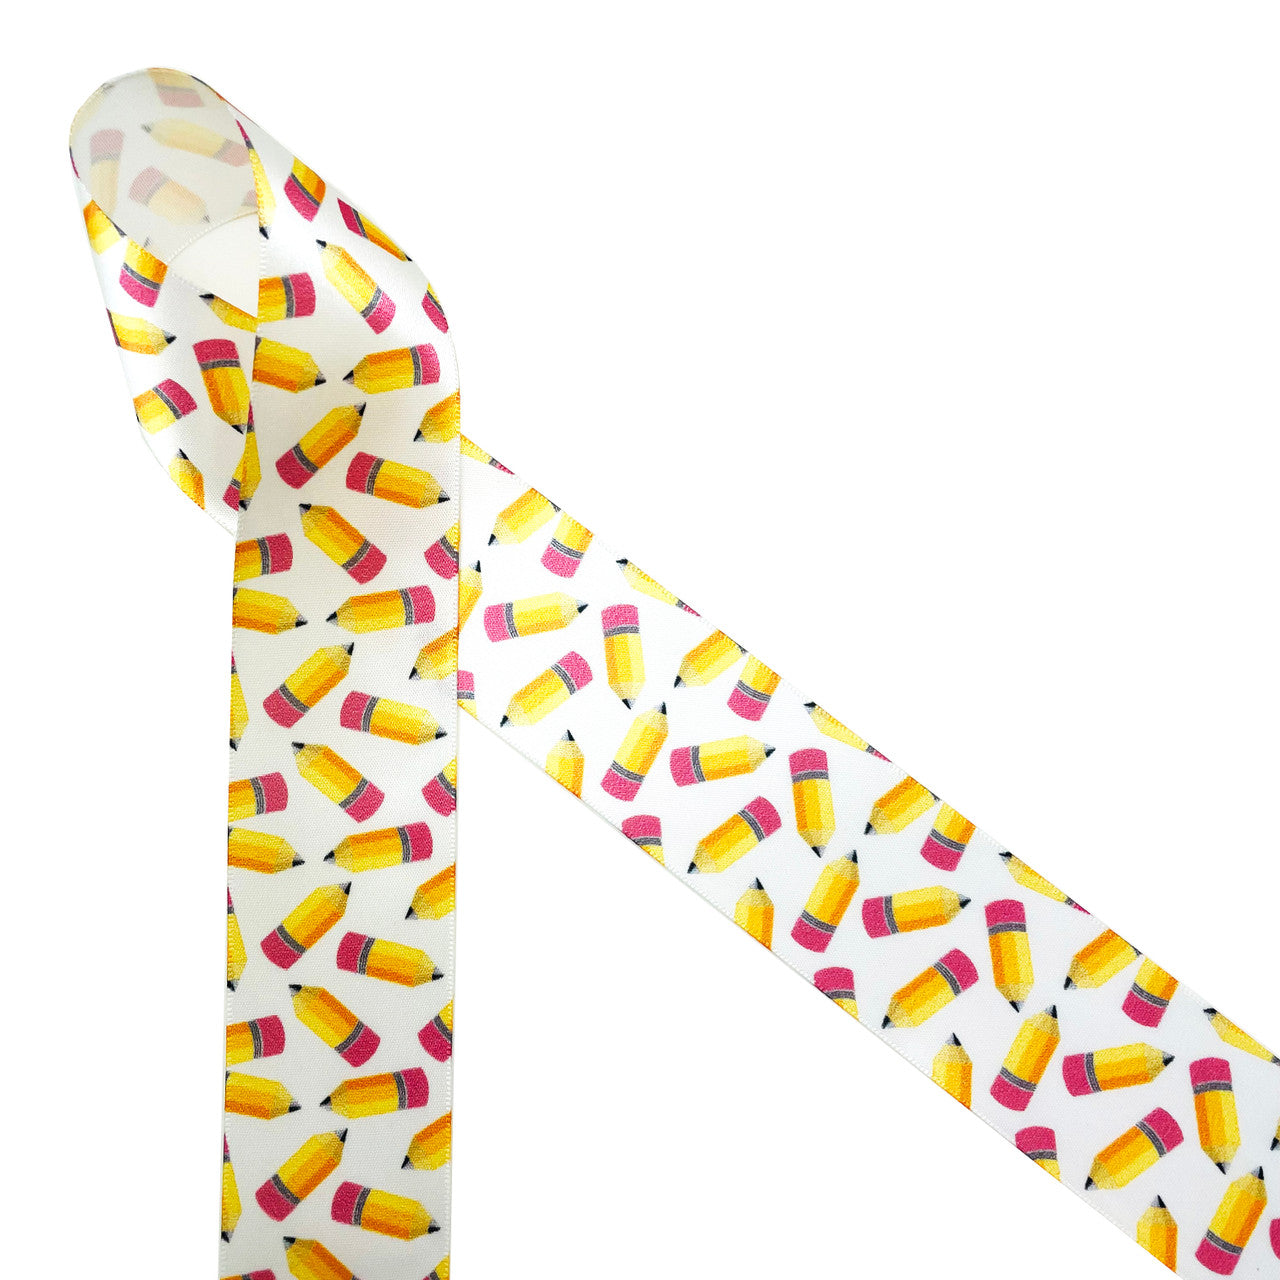 Little yellow pencils with red erasers tossed on a white background printed on 1.5" white single face satin ribbon is the perfect  back to school ribbon for hair bows, head bands, hat bands, party decor and gifts. Use this ribbon for teacher gifts, teacher appreciation lunches, quilting and school themed craft projects. All our ribbon is designed and printed in the USA